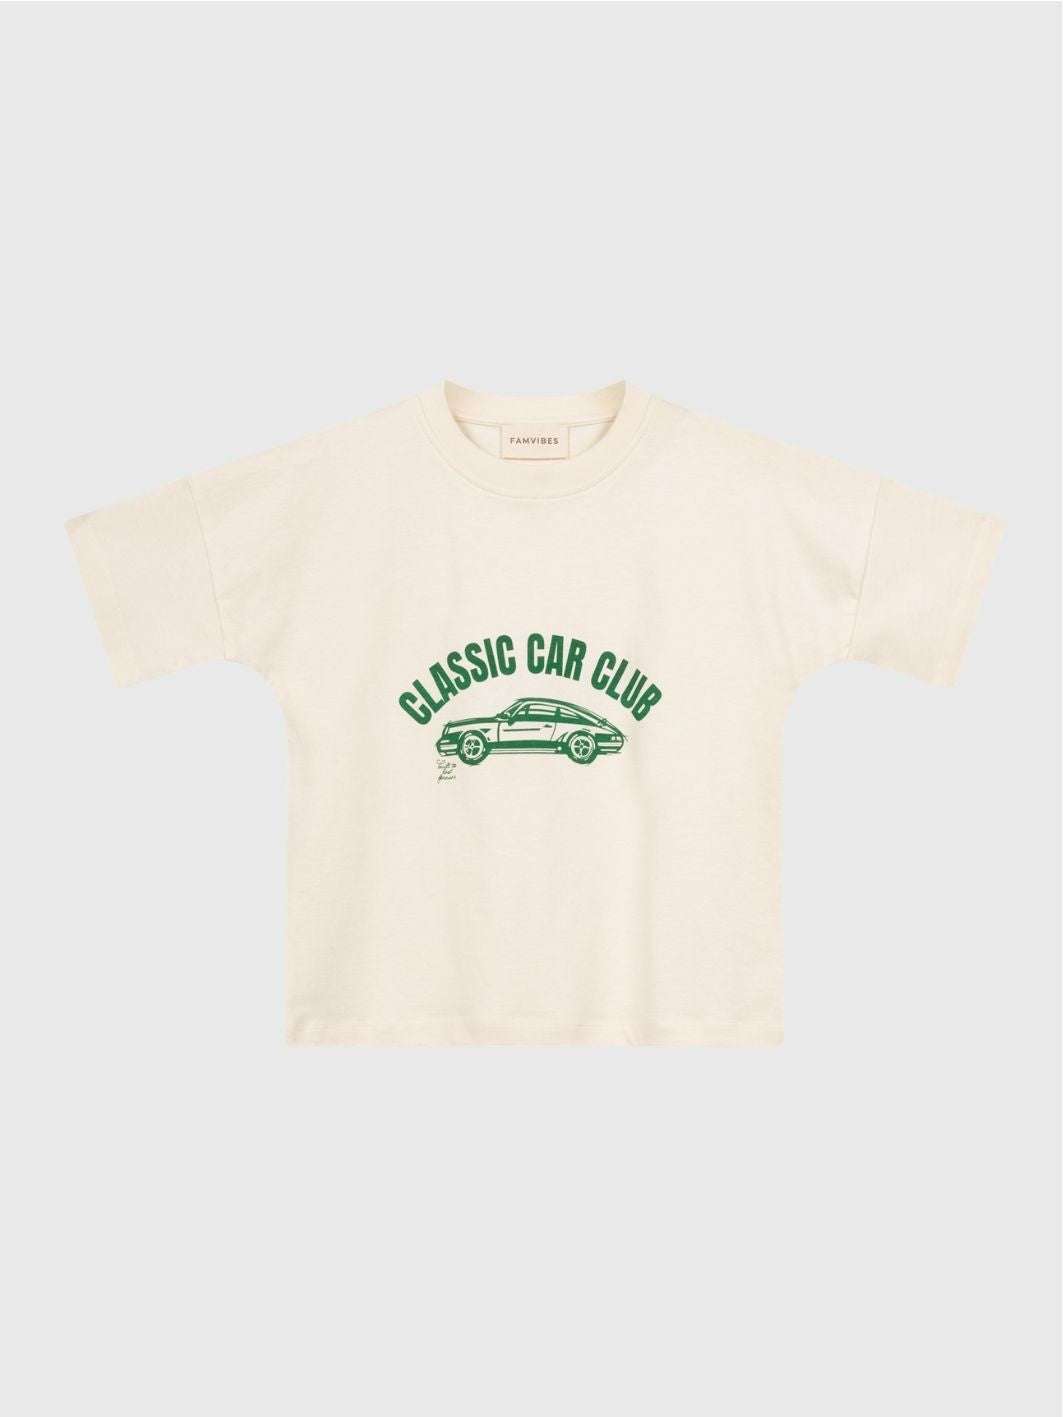 Classic Car Club Shirt Kids - The Little One • Family.Concept.Store. 